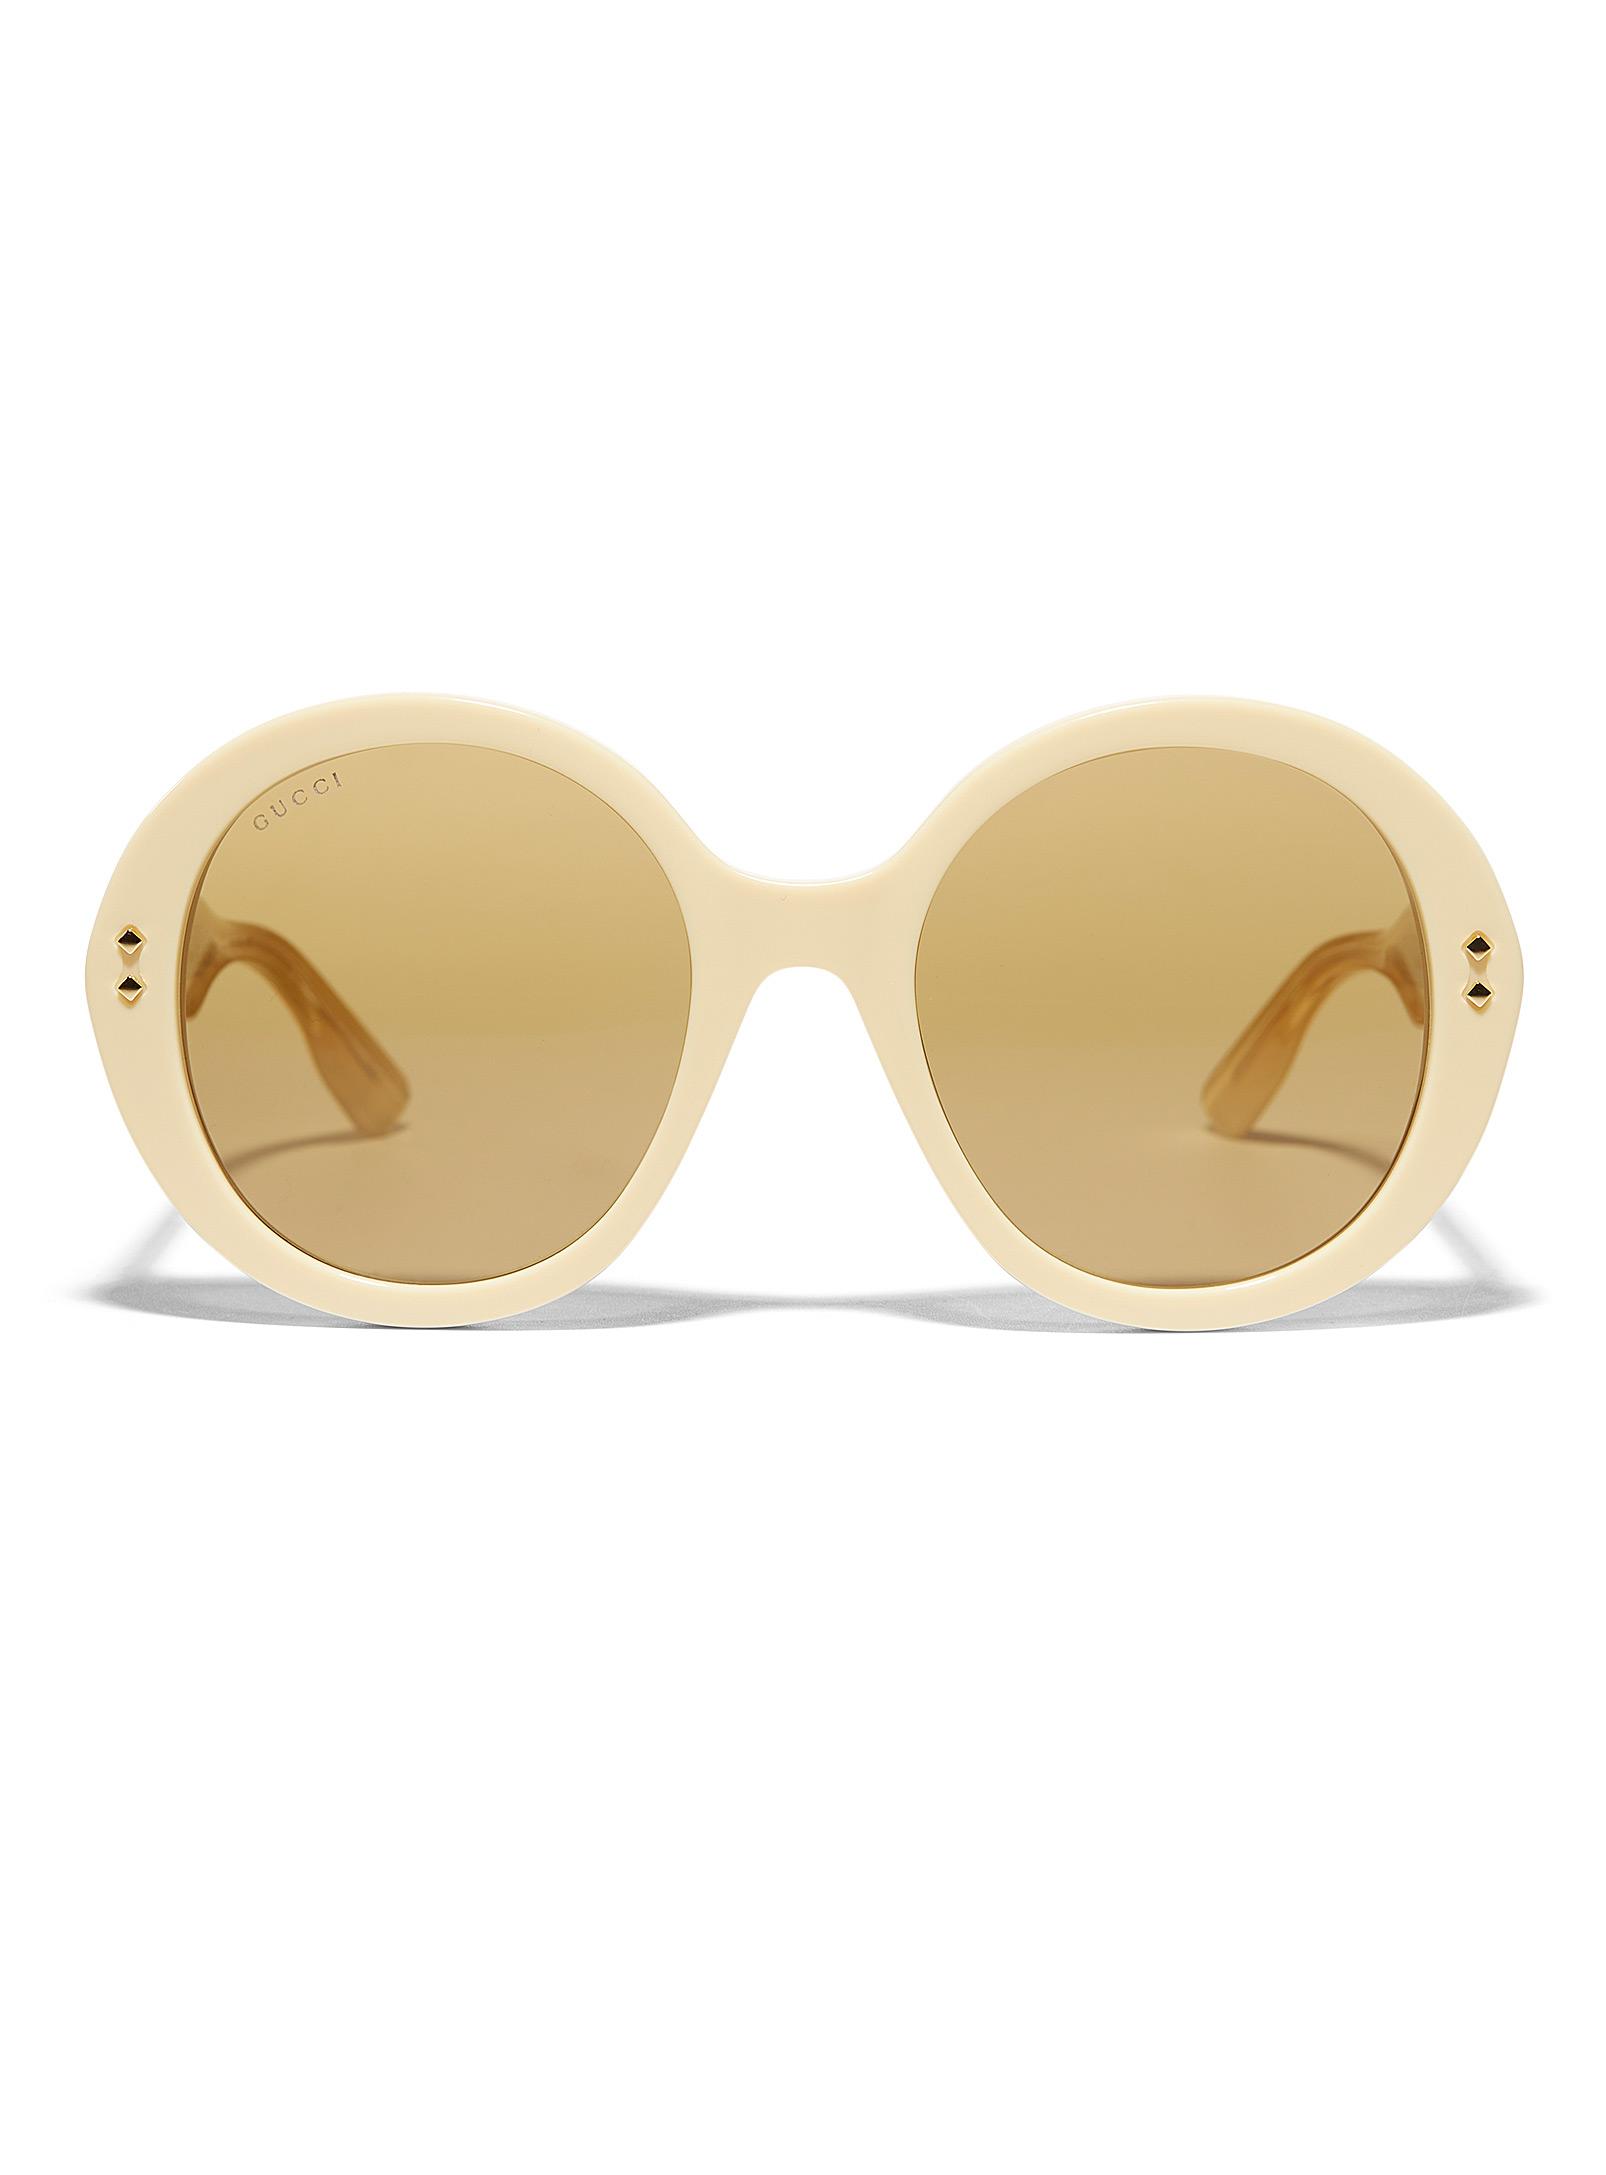 Gucci Bold Round Sunglasses in Natural | Lyst